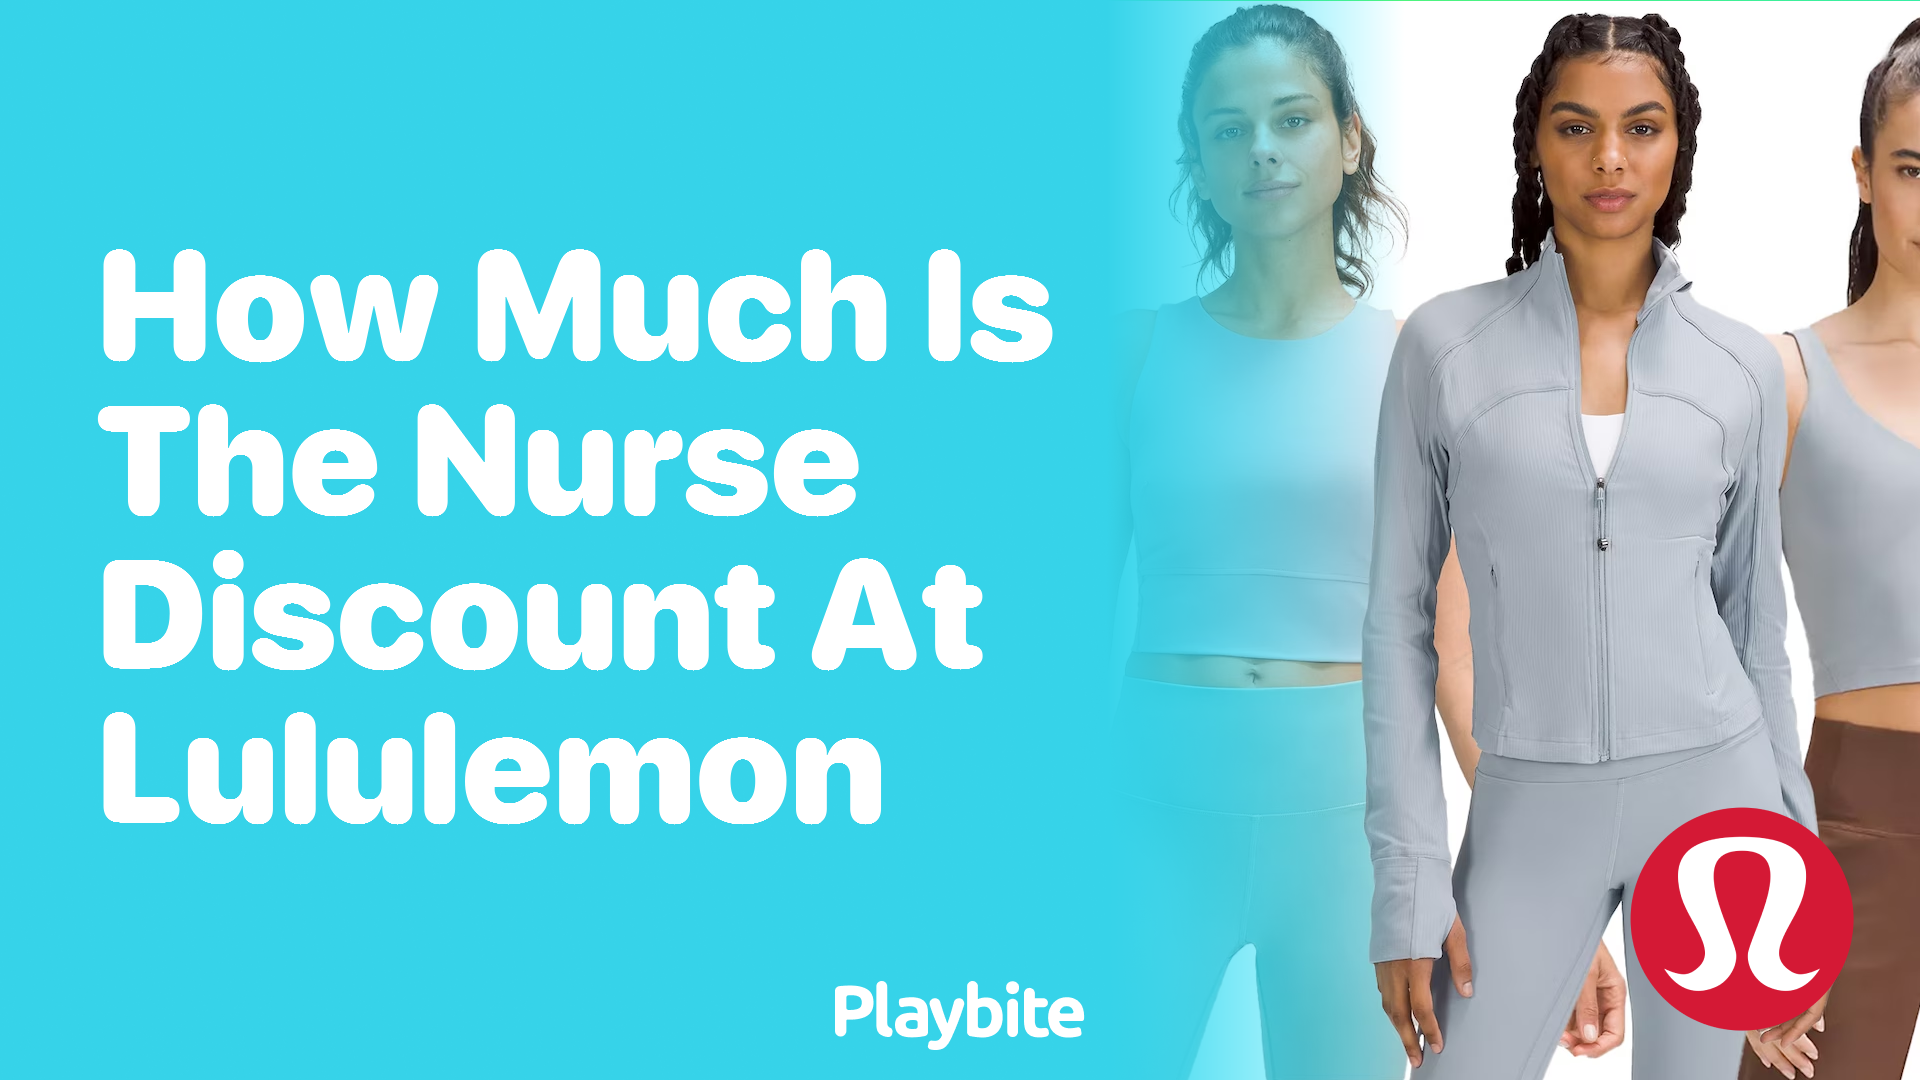 How Much is the Nurse Discount at Lululemon? - Playbite